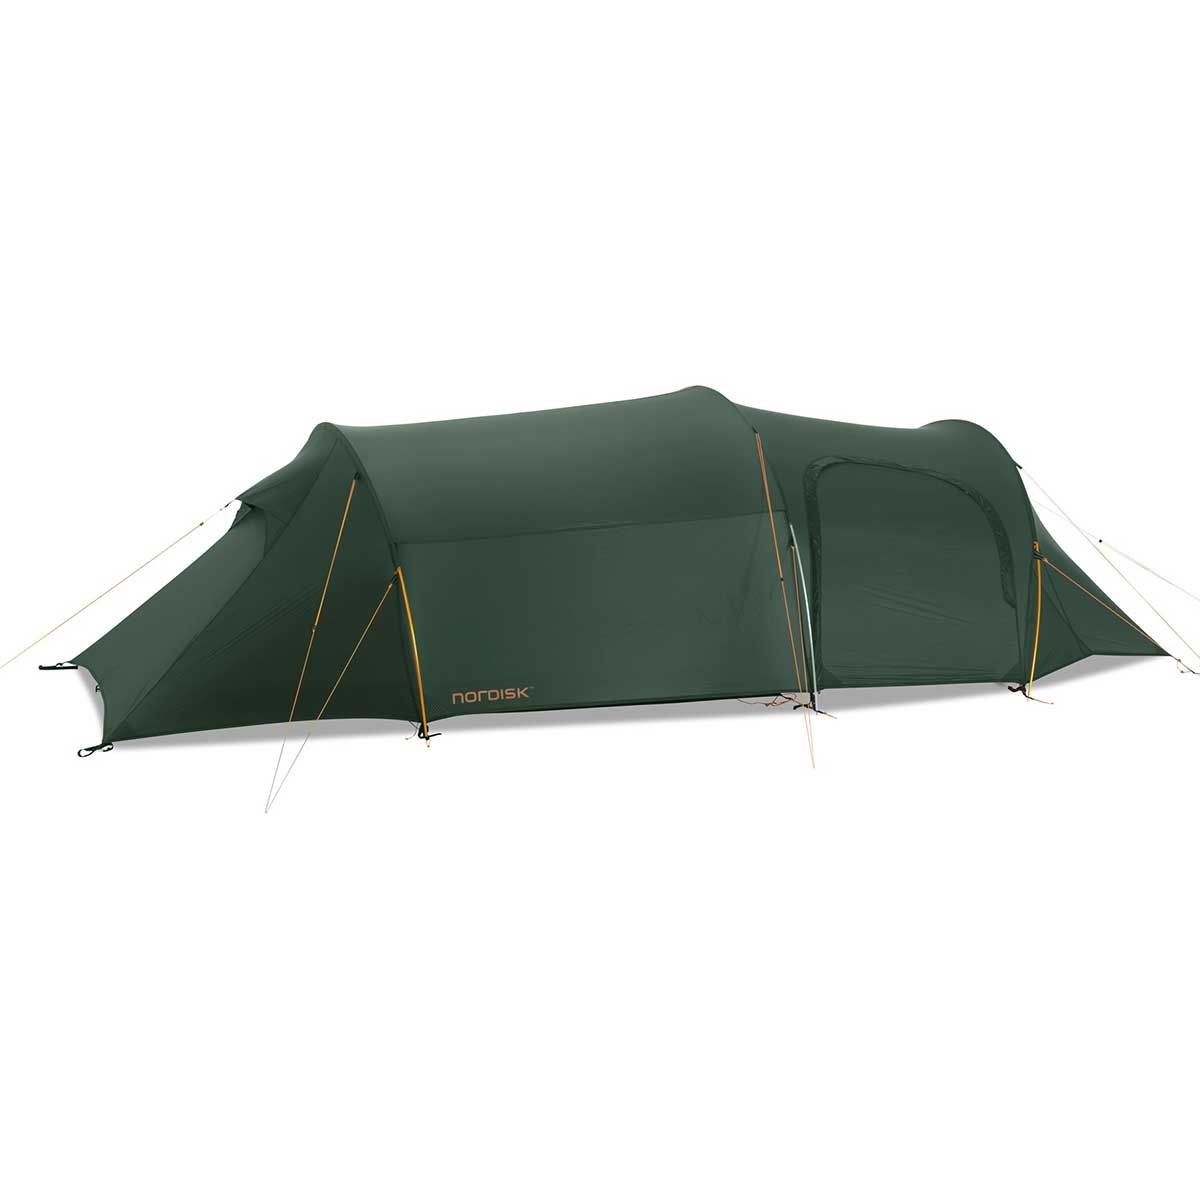 Tente Nordisk Oppland 3 LW - 3 personnes